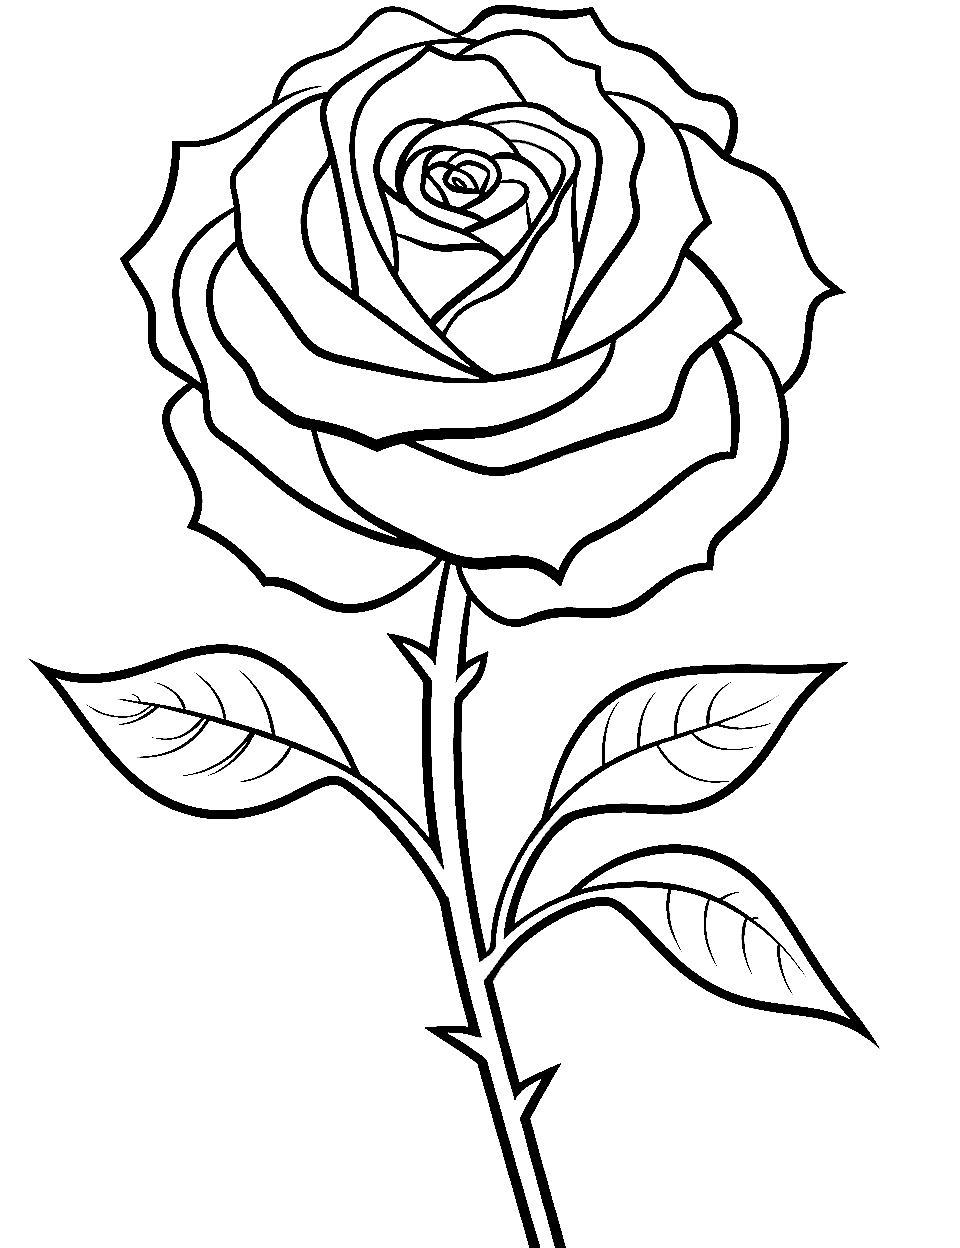 How to Draw a Rose - Easy Printable Tutorial For Kids | Kids Activities Blog